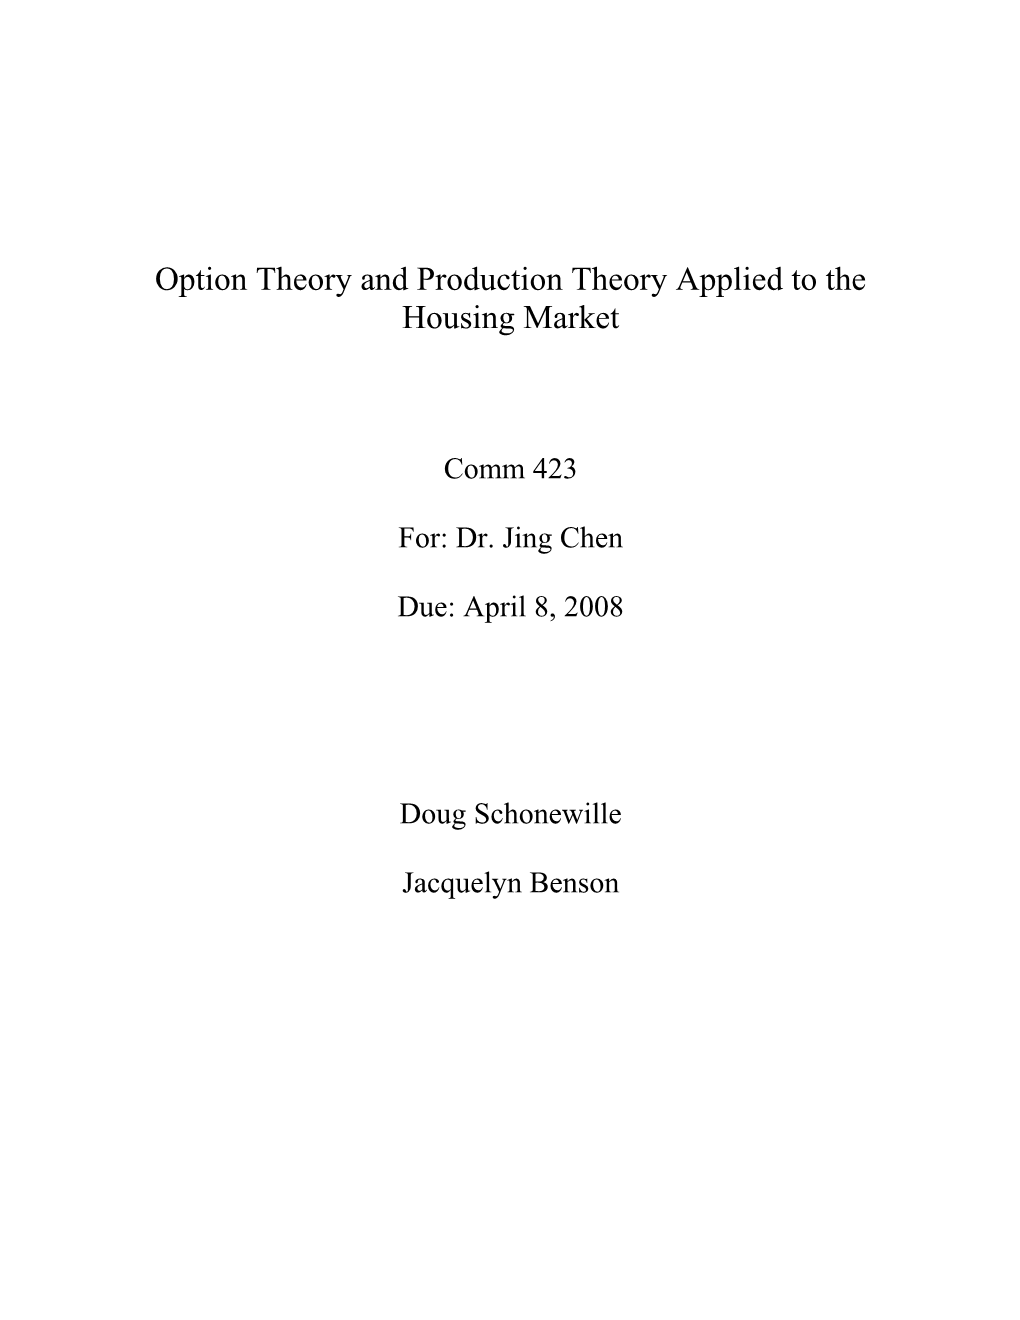 Option Theory and Fixed Costs Applied to the Housing Market